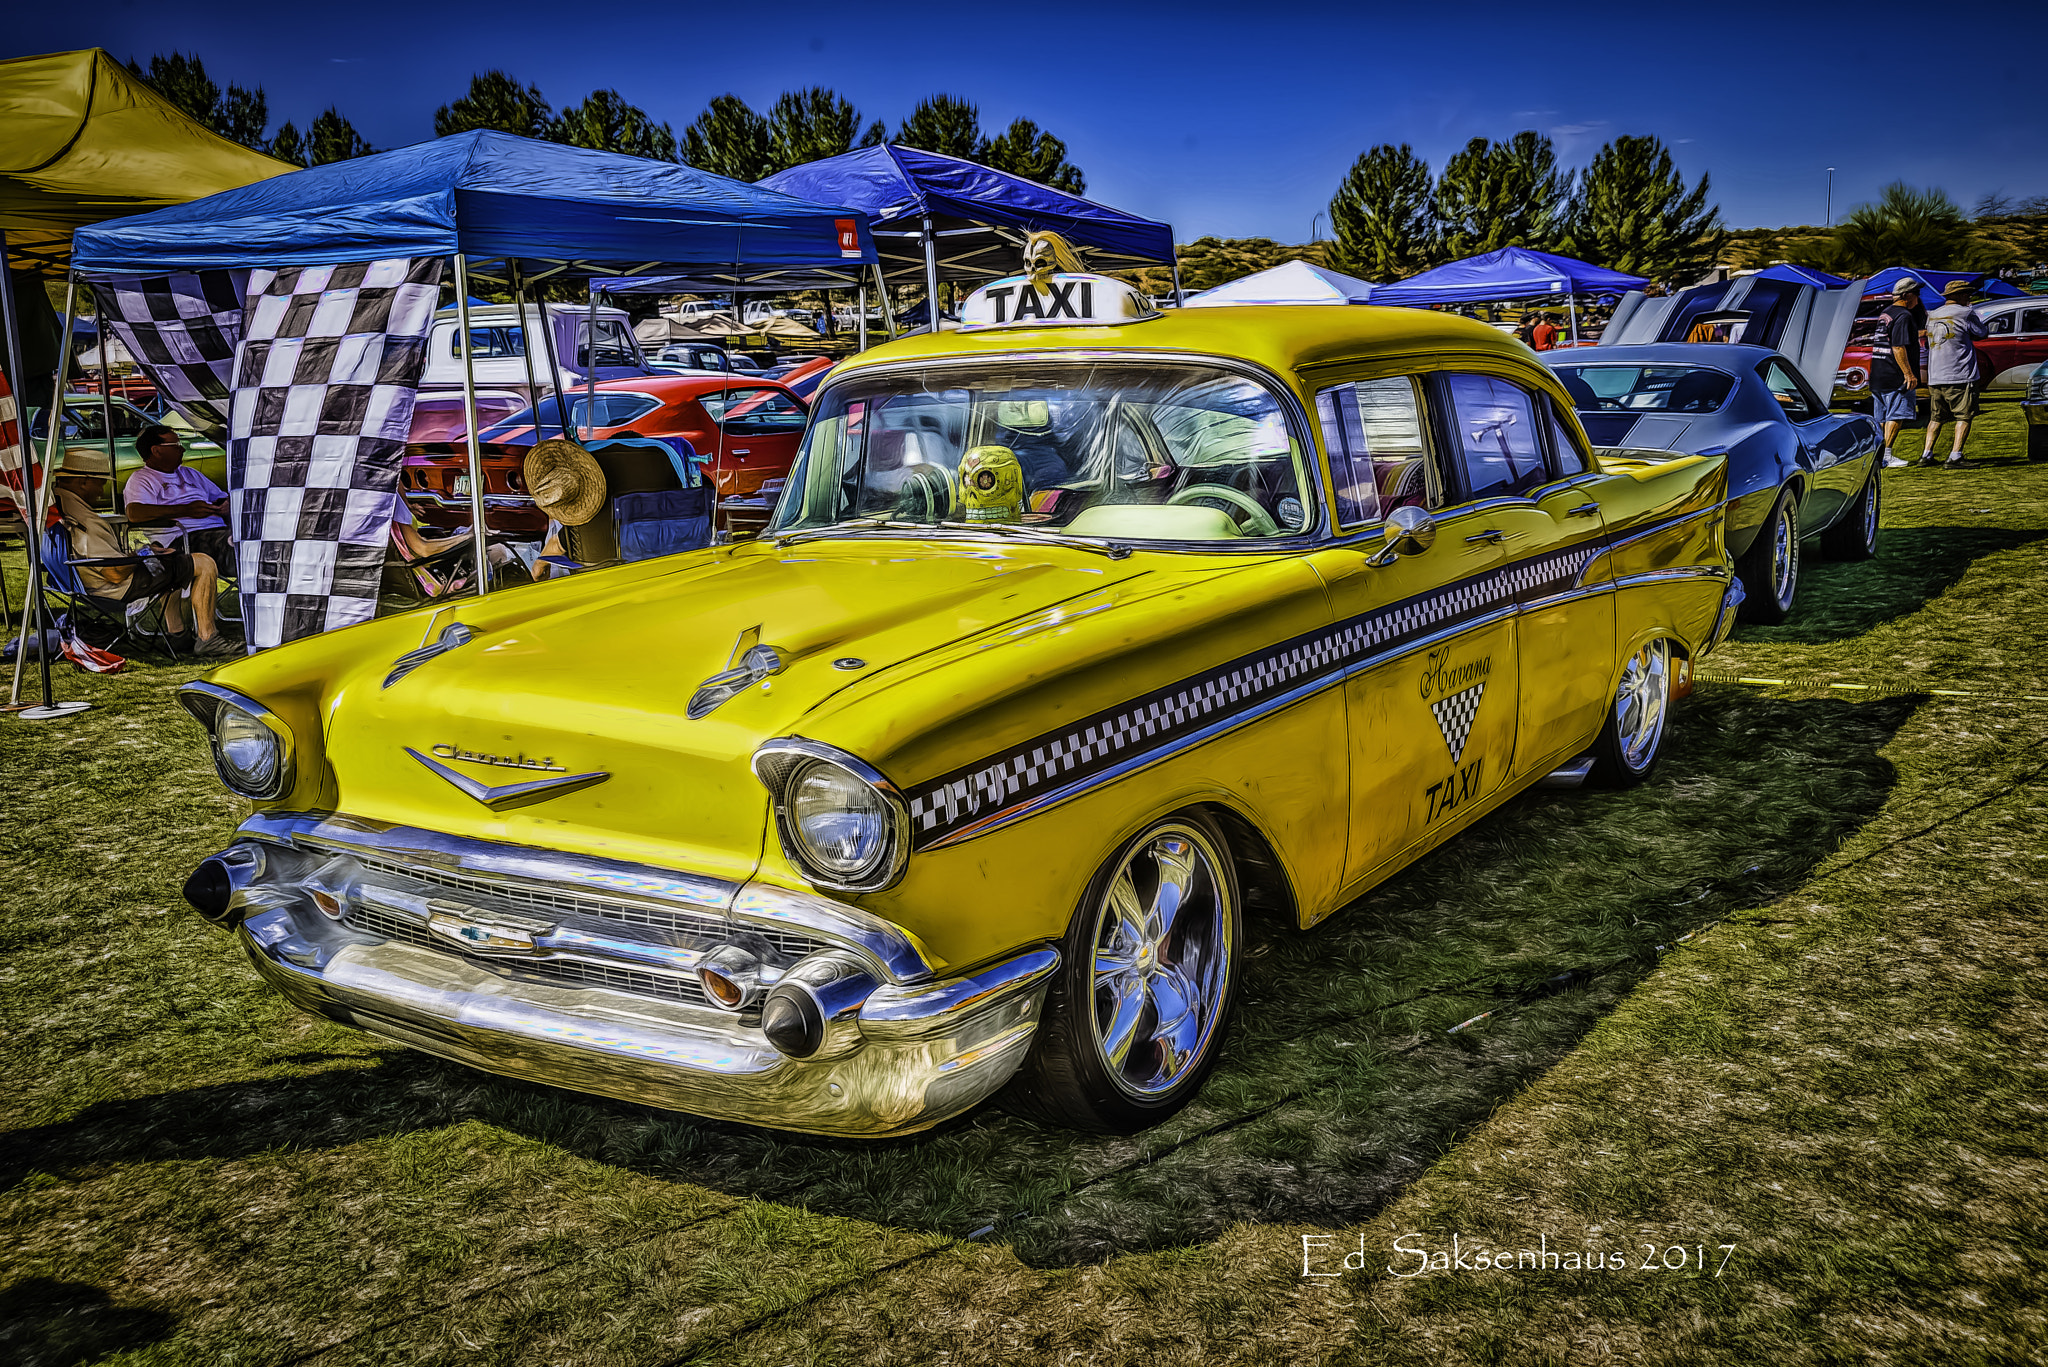 Nikon D800 sample photo. Souped up chevy taxi photography